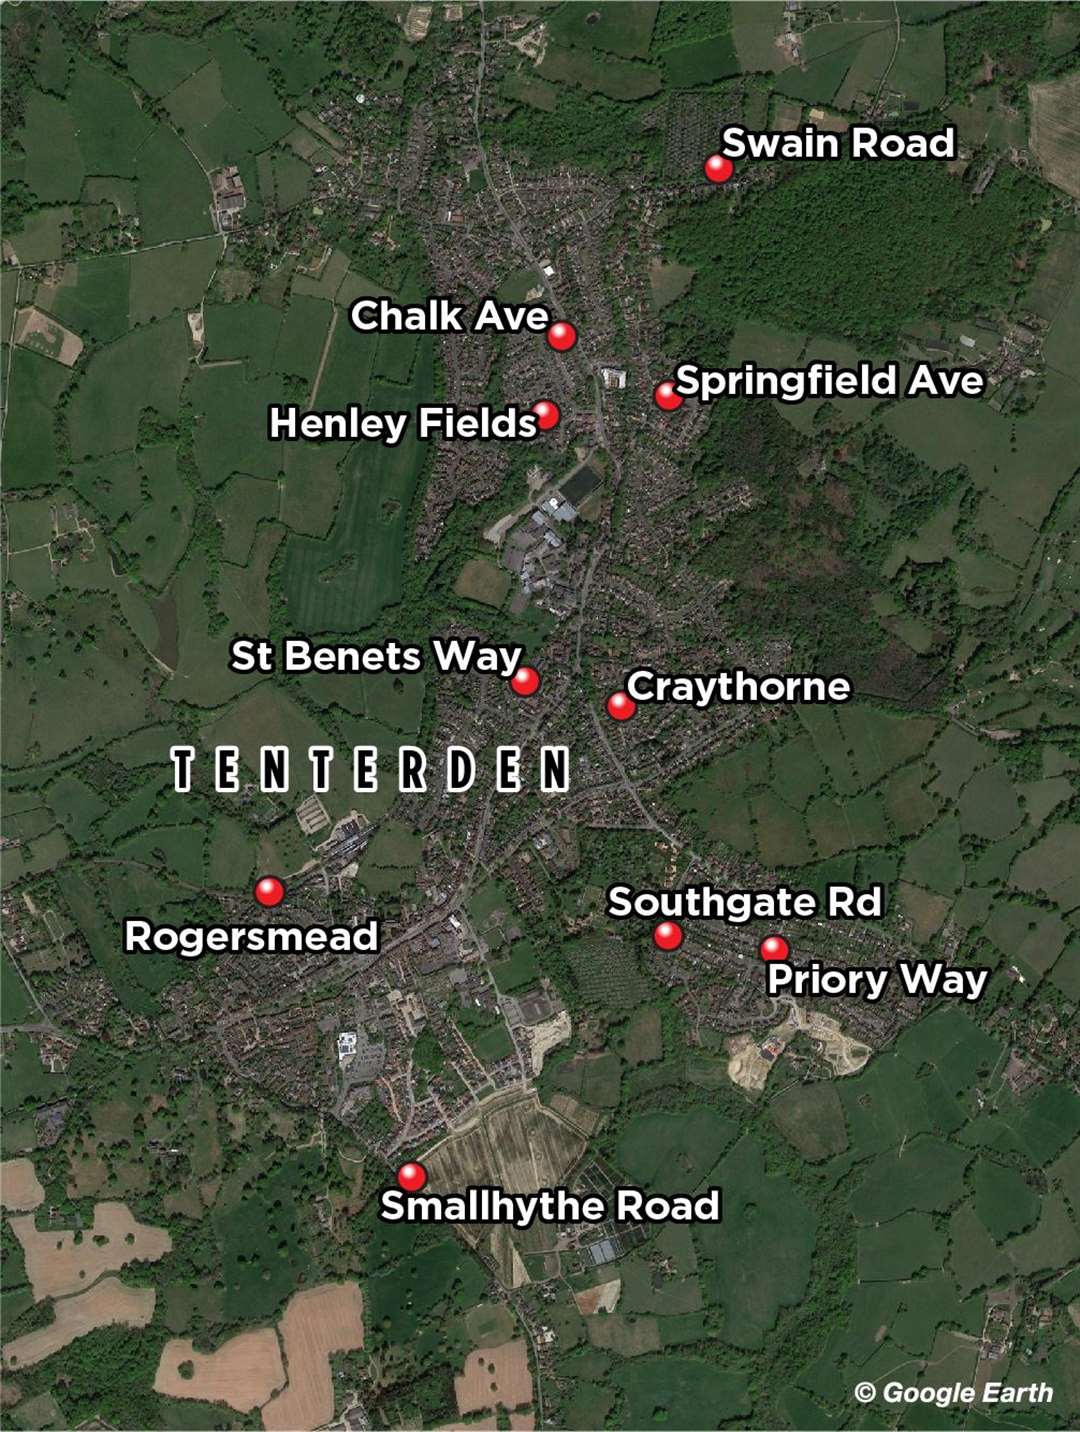 A map showing the locations of the stolen covers